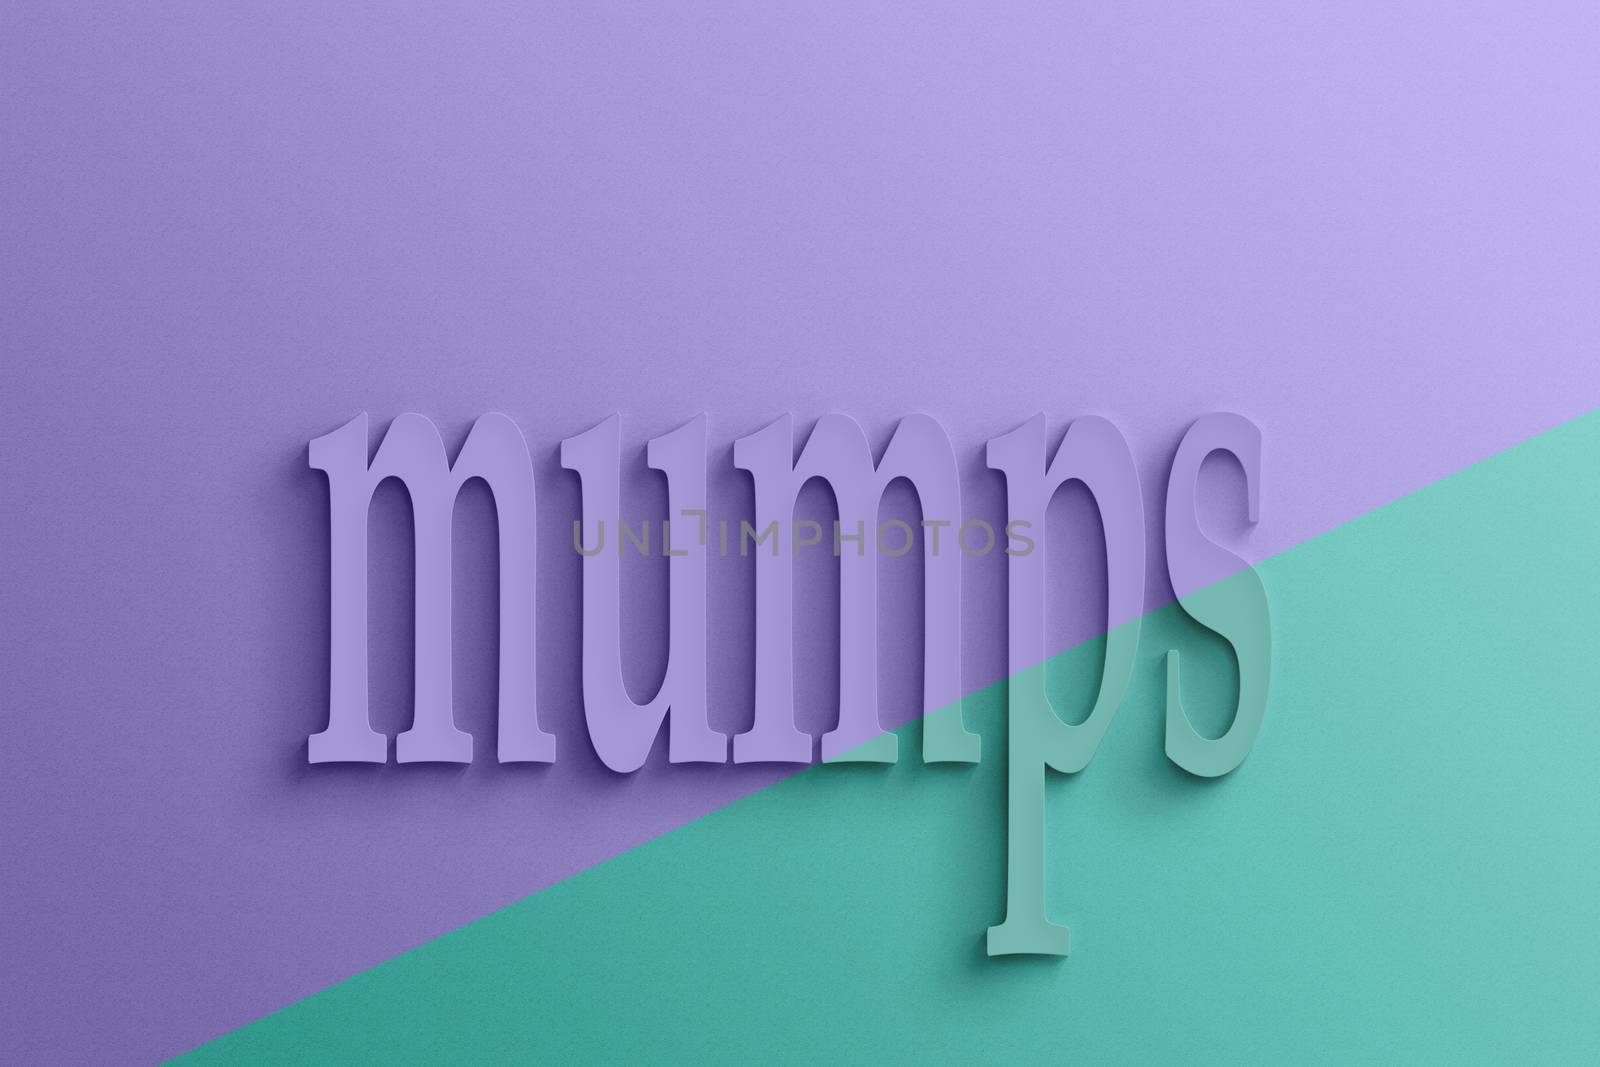 3D text with shadow and reflection, mumps.